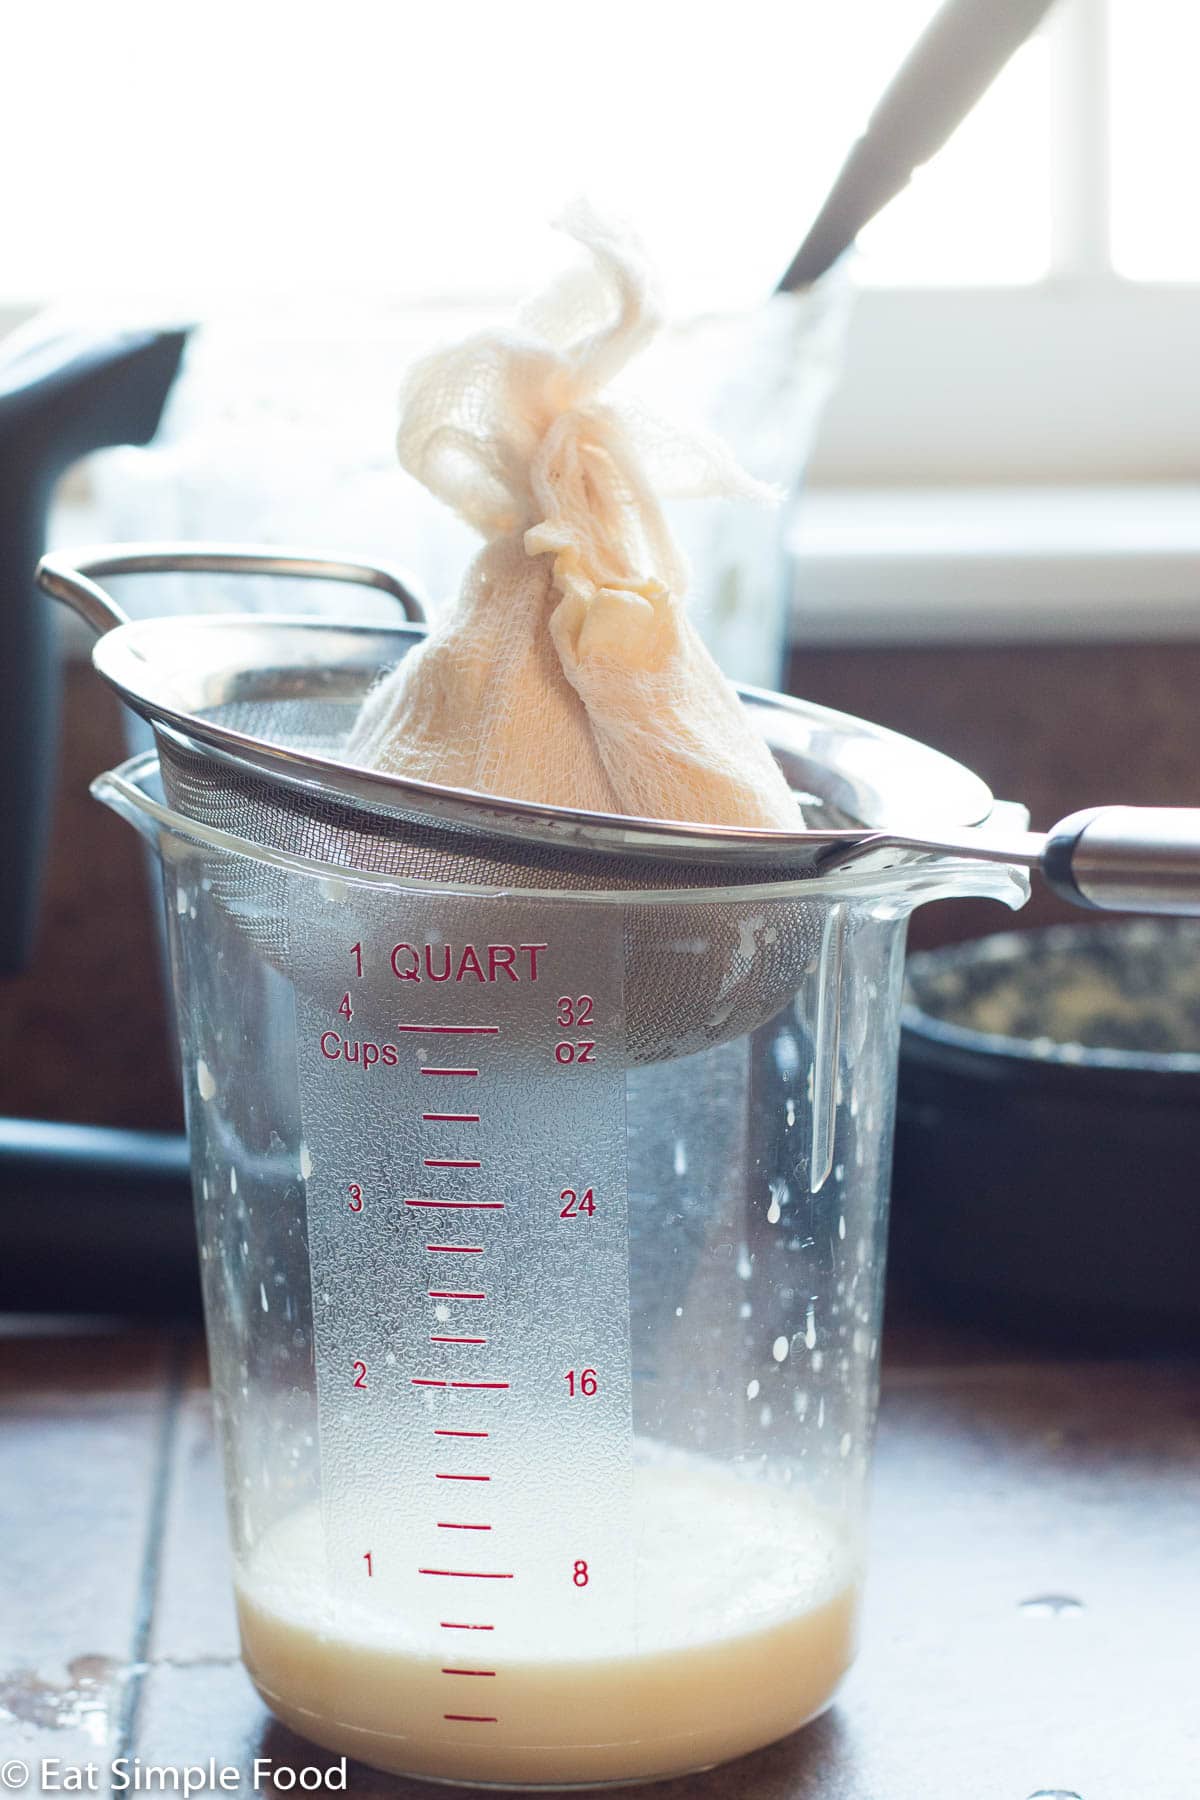 A sieve on top of a 4 cup plastic clear measuring cup. The sieve has homemade butter wrapped in cheesecloth being drained.